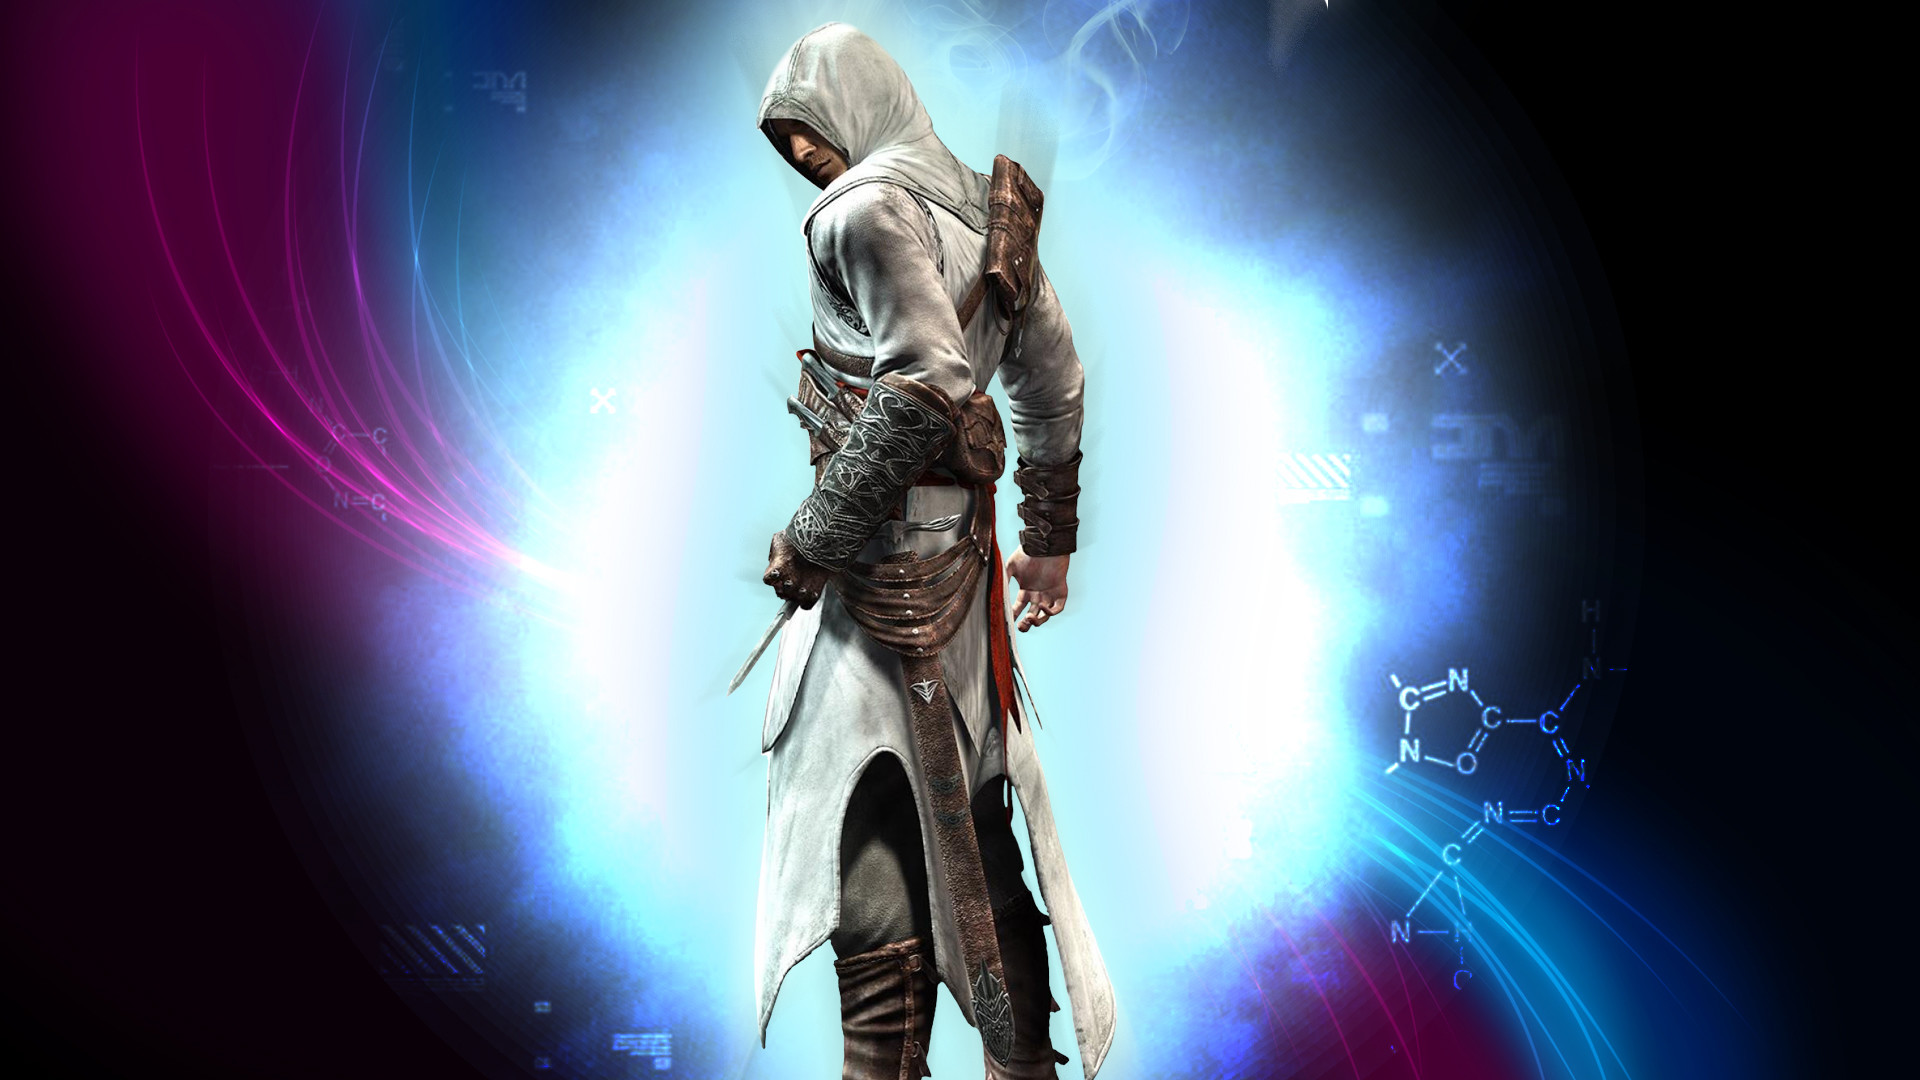 1920x1080 Altair Wallpaper by andyNroses Altair Wallpaper by andyNroses